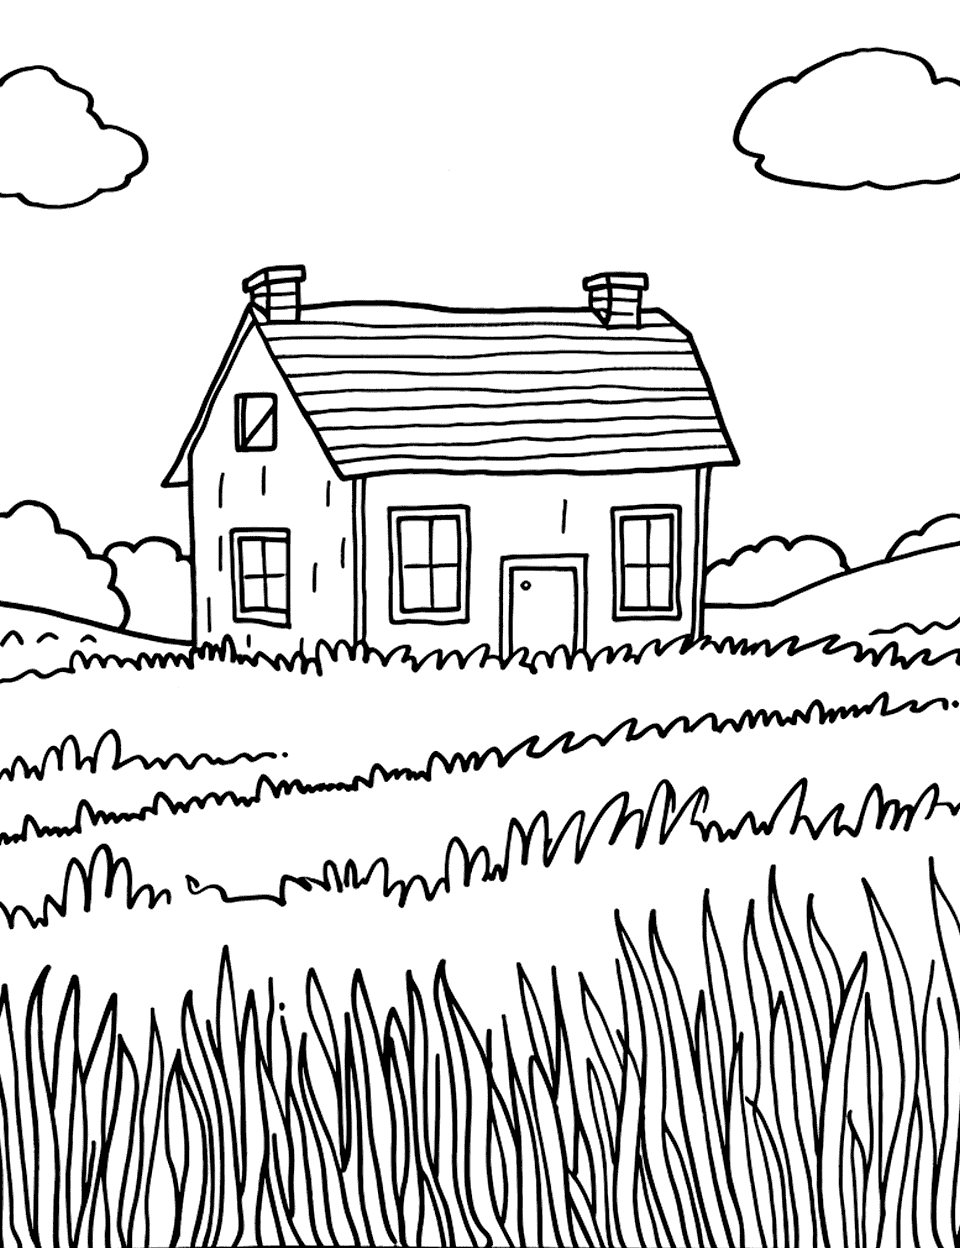 Farm House Surrounded by Fields Animal Coloring Page - A cozy farm house with a large field in the foreground, simple and welcoming.